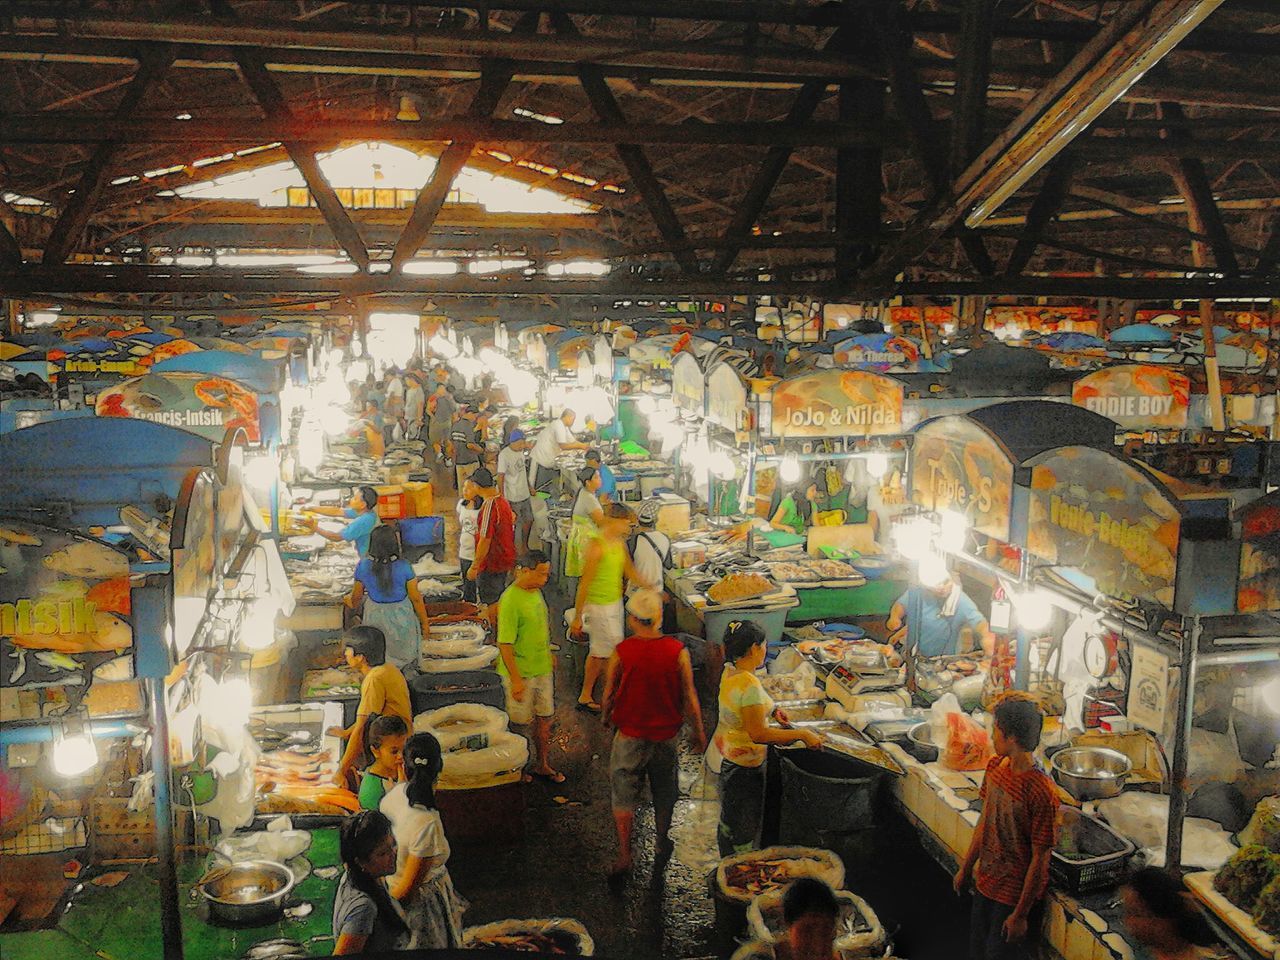 retail, market, large group of objects, market stall, variation, abundance, indoors, for sale, choice, large group of people, men, shopping, hanging, arrangement, store, person, consumerism, street market, multi colored